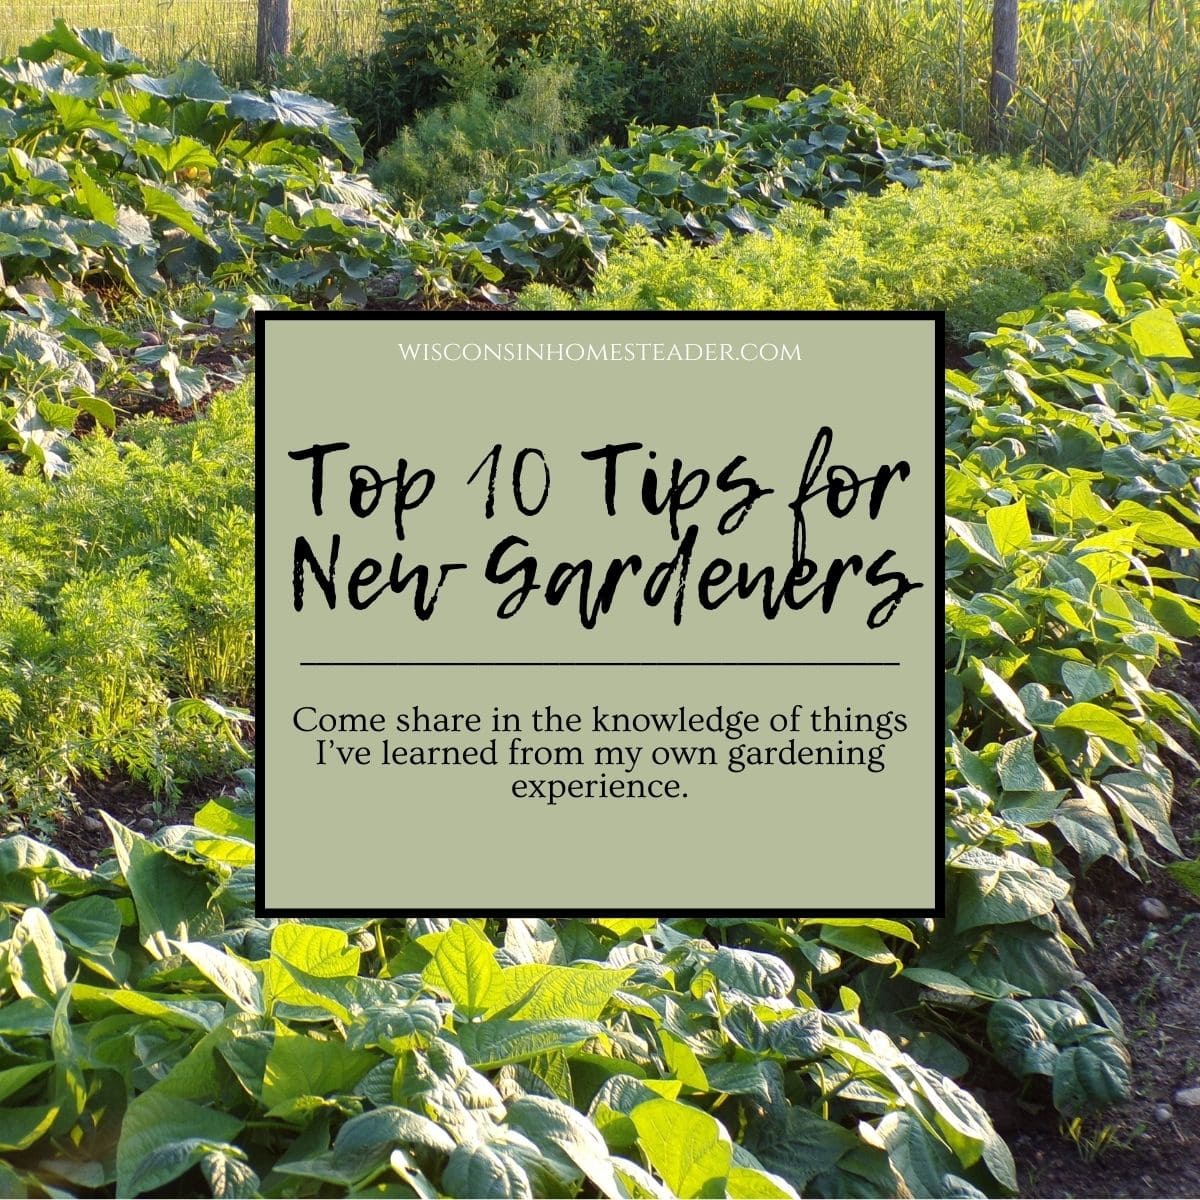 top 10 tips for gardeners banner sits in front of a garden scene